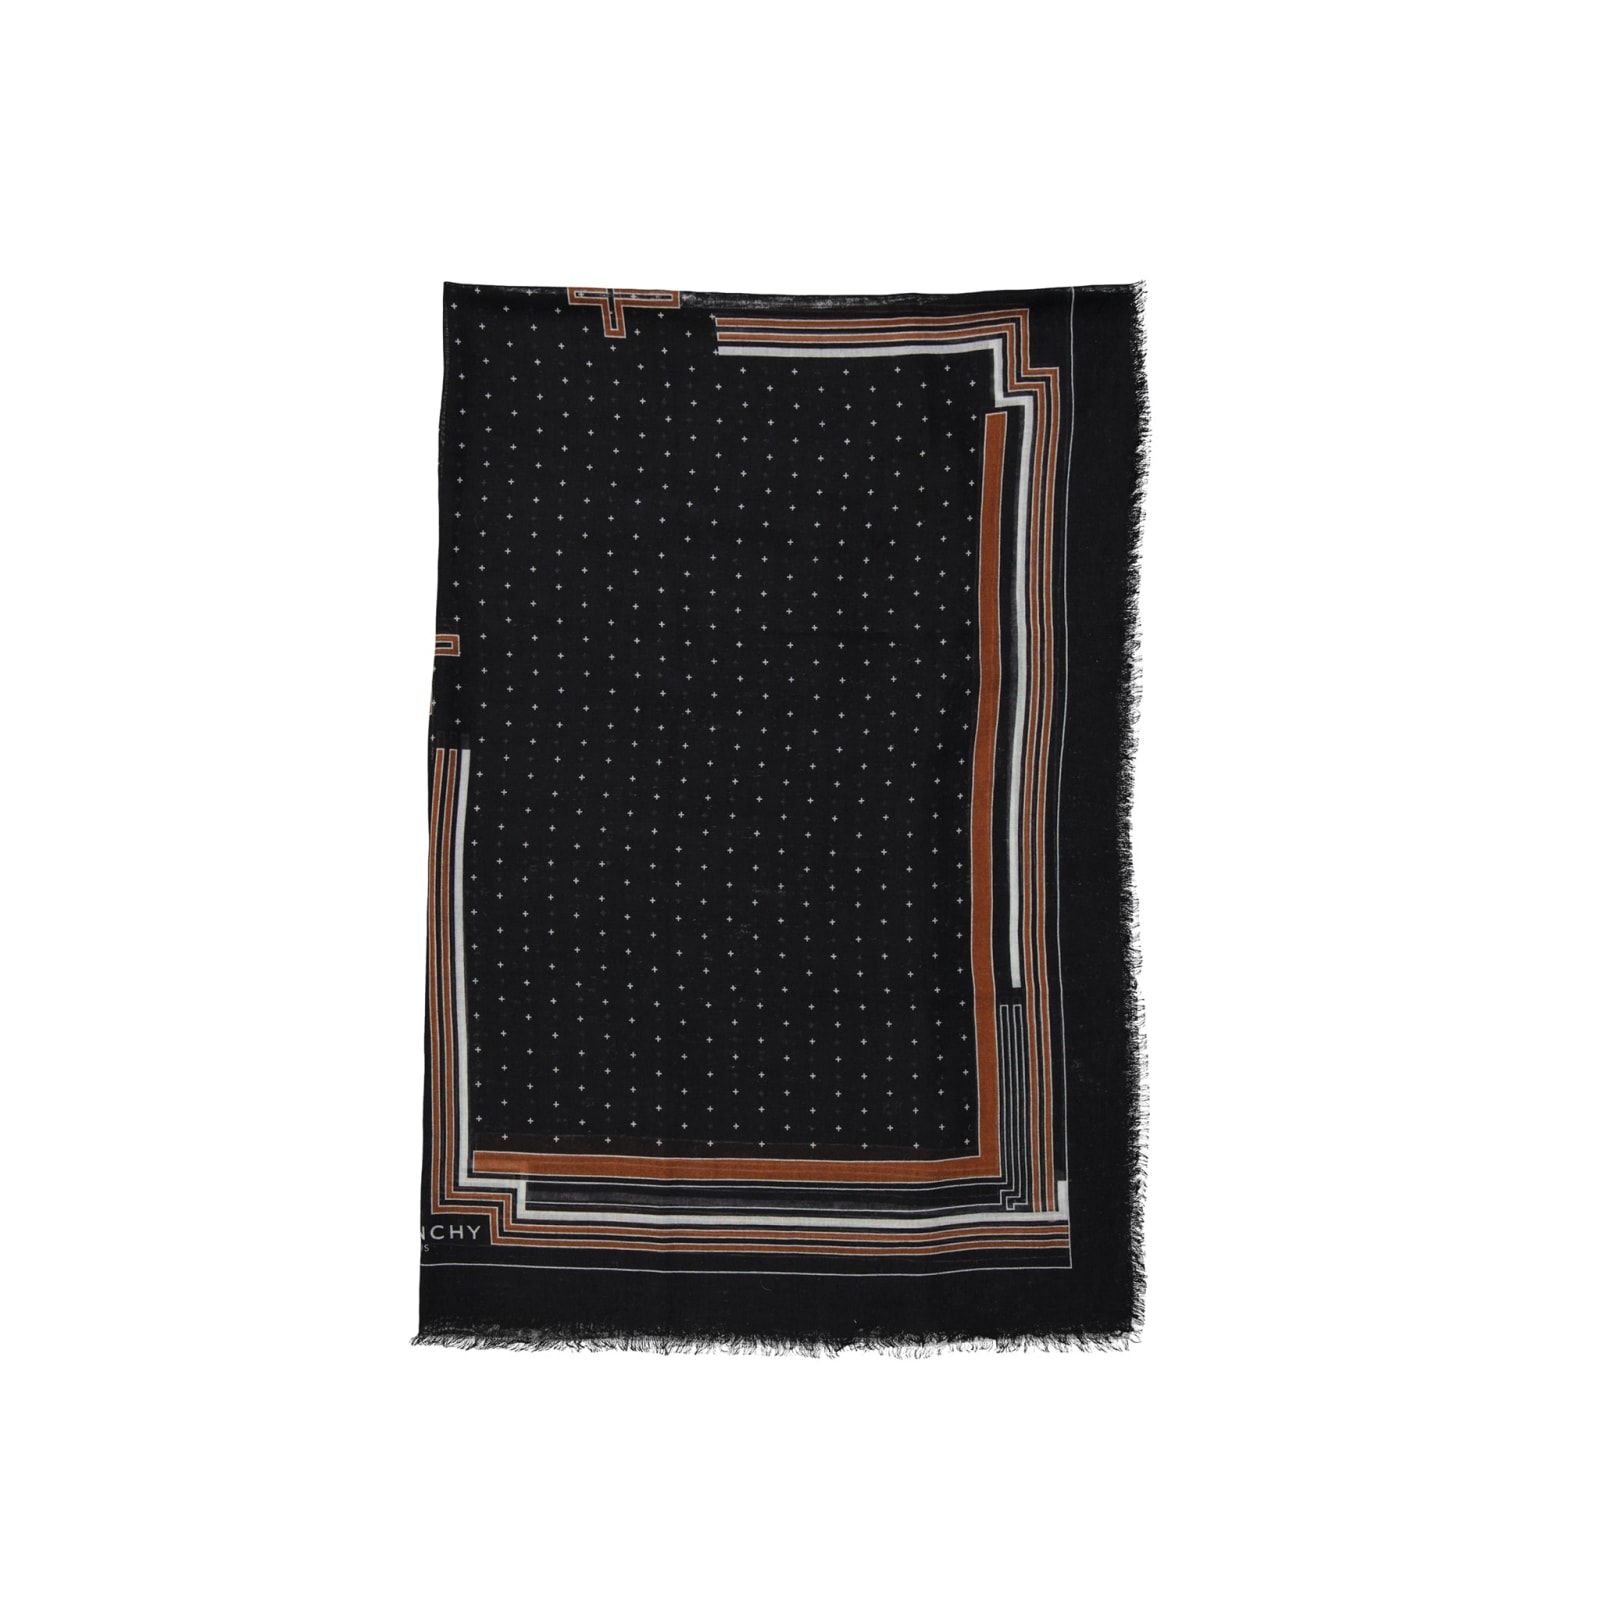 Shop Givenchy Printed Cashmere Foulard In Black